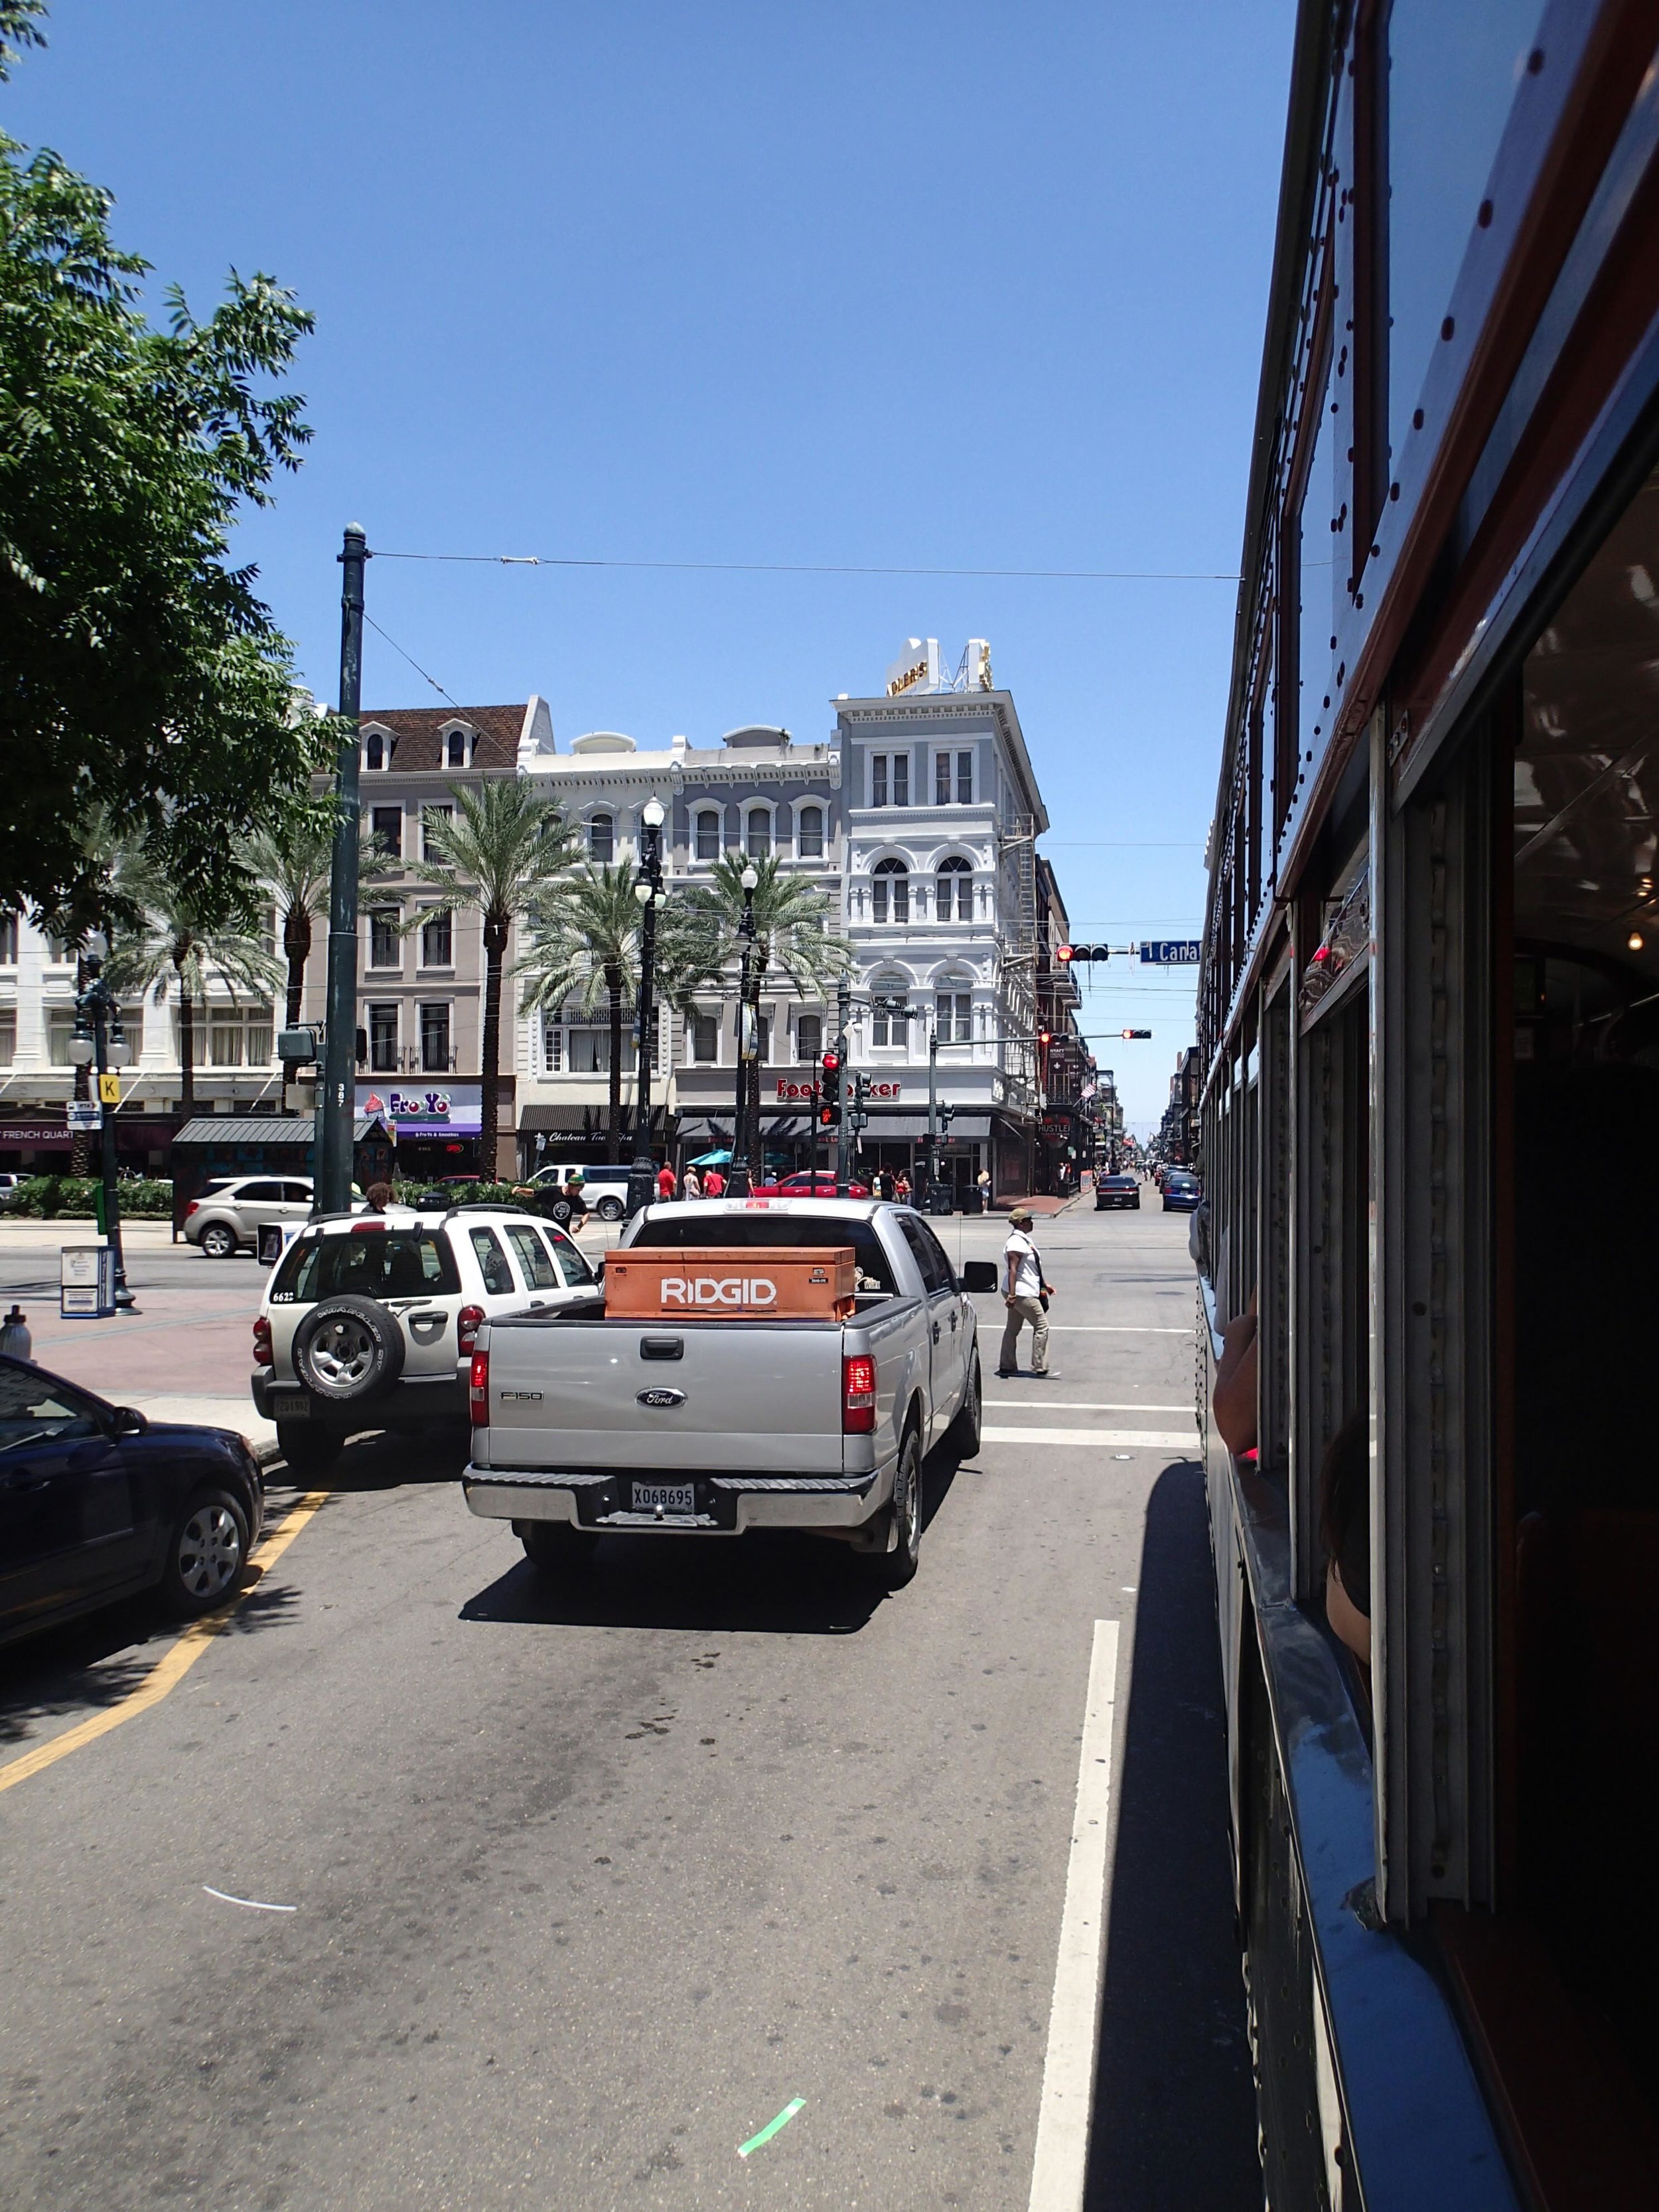 view from the streetcar.jpg